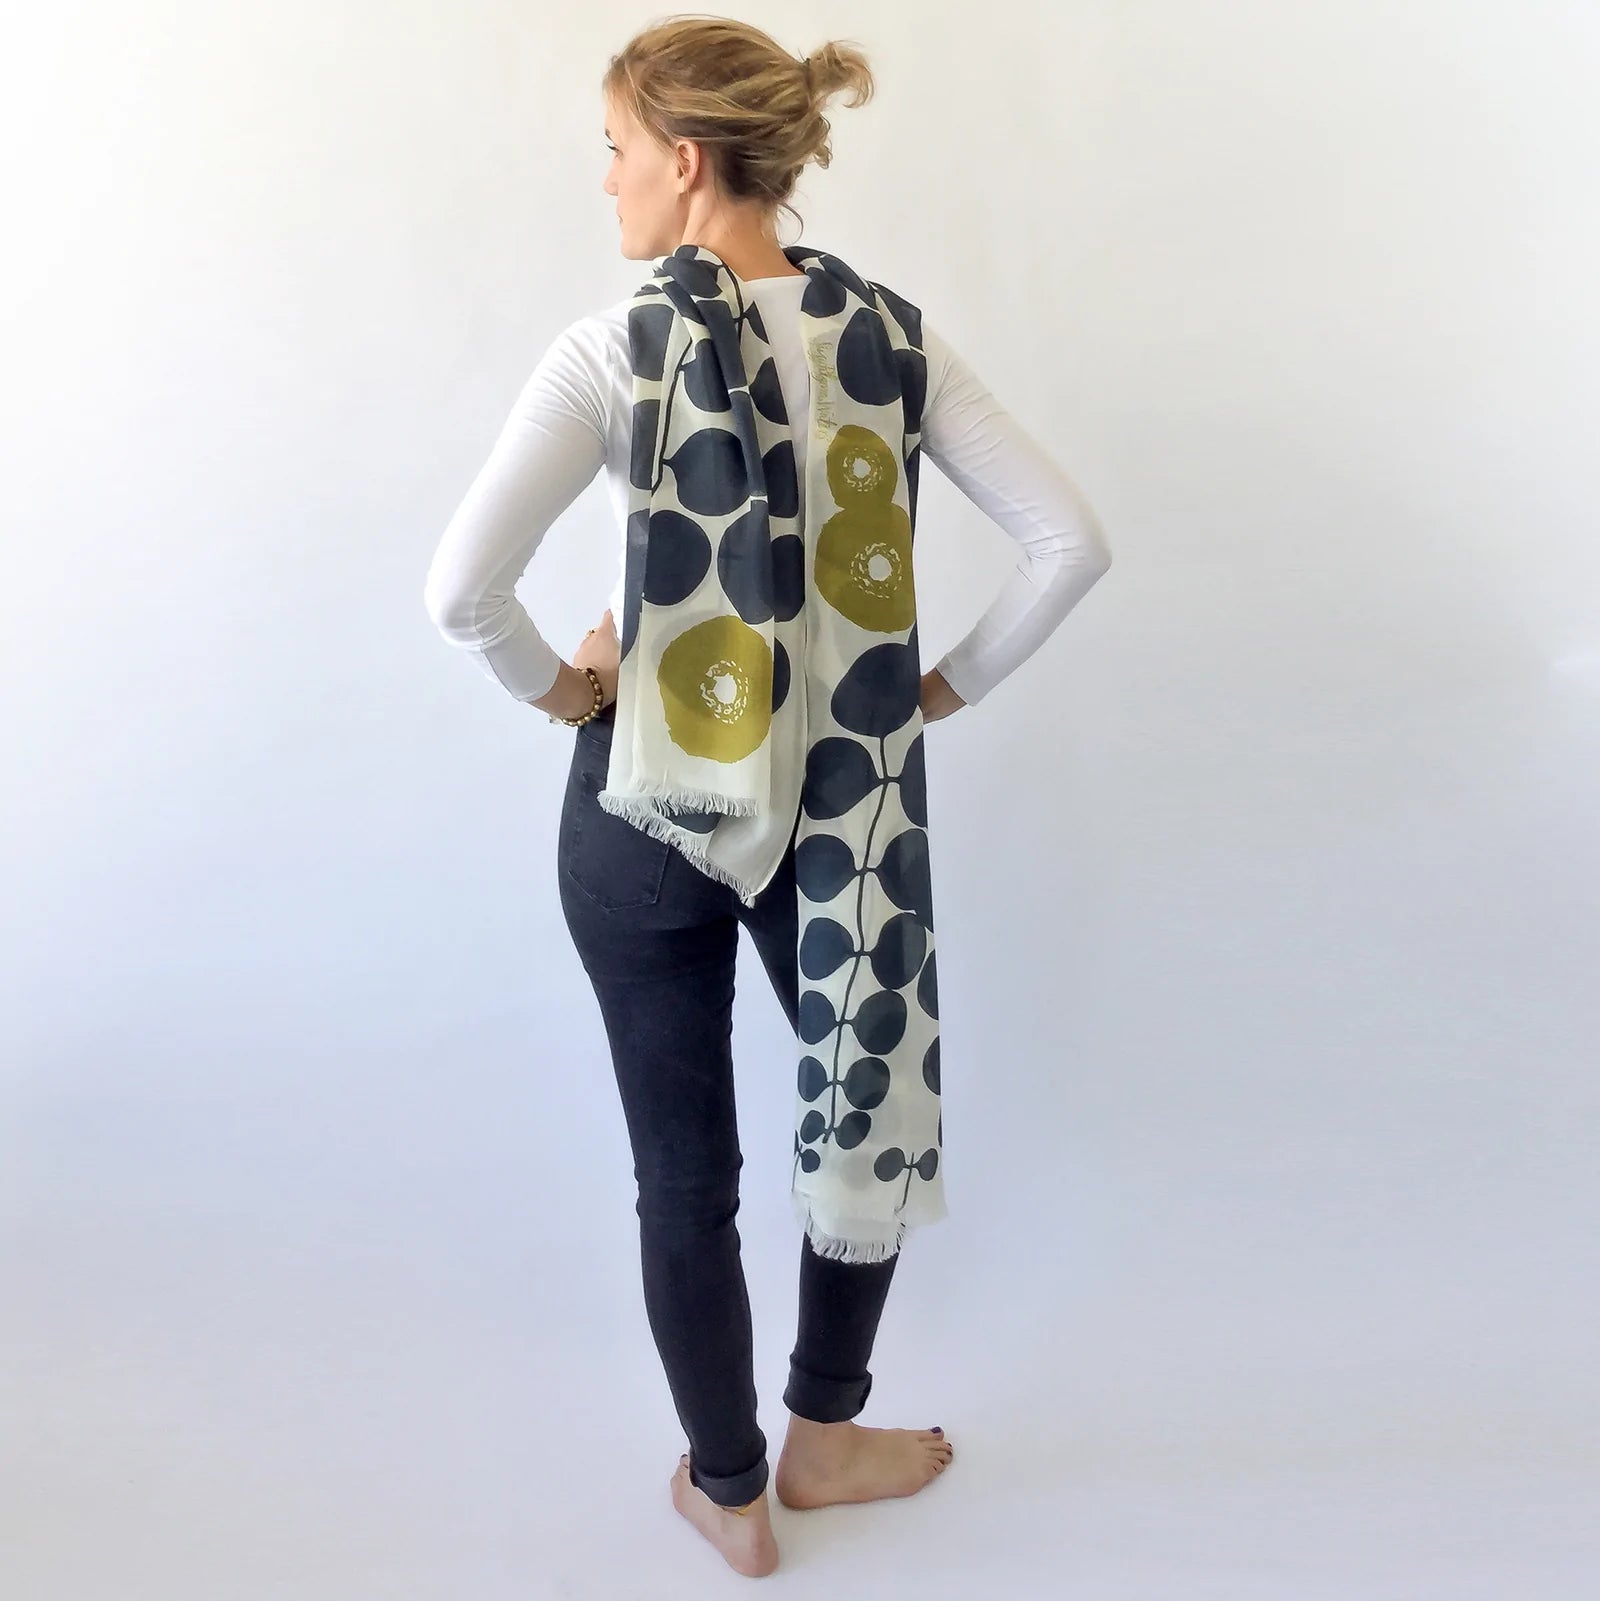 woman showing off black, cream and green merino wool scarf